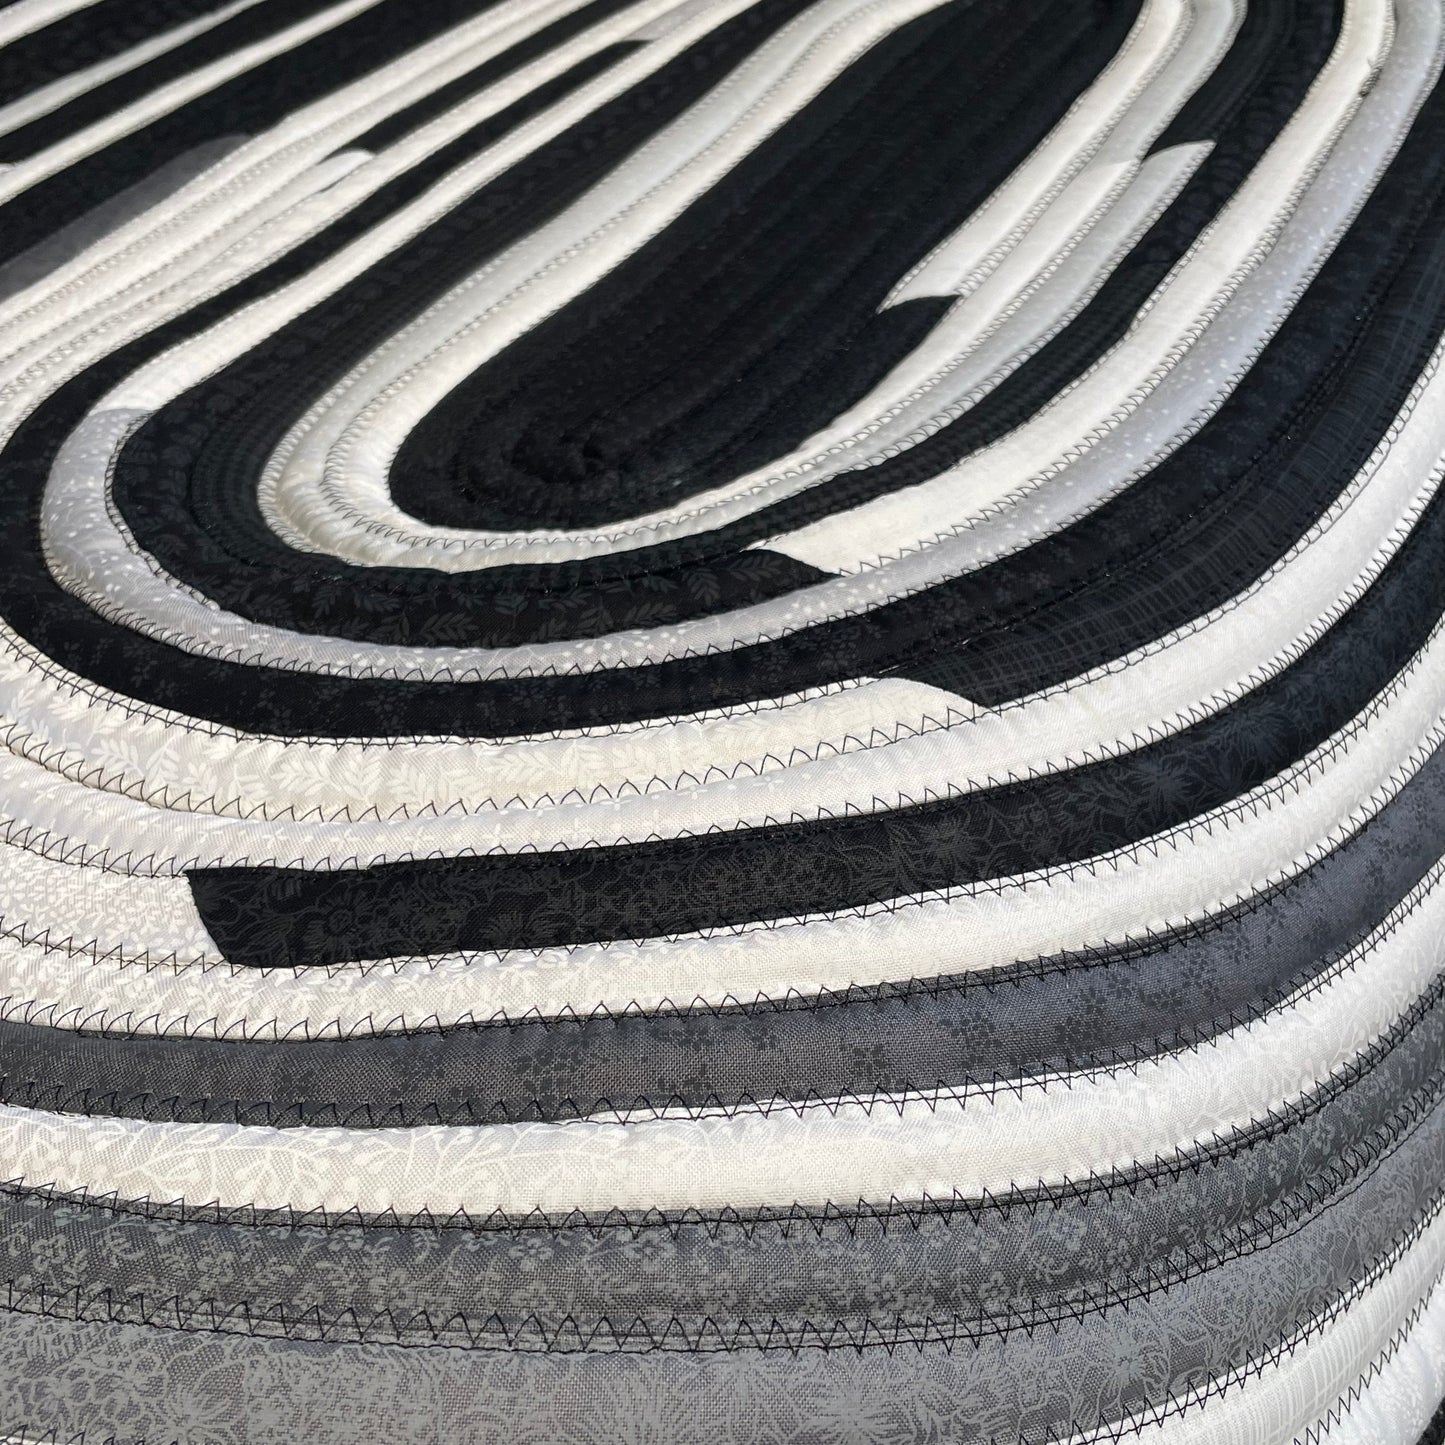 Black and White Kitchen Accent Rug Washable Cotton Rug For Bedside or Bathmat